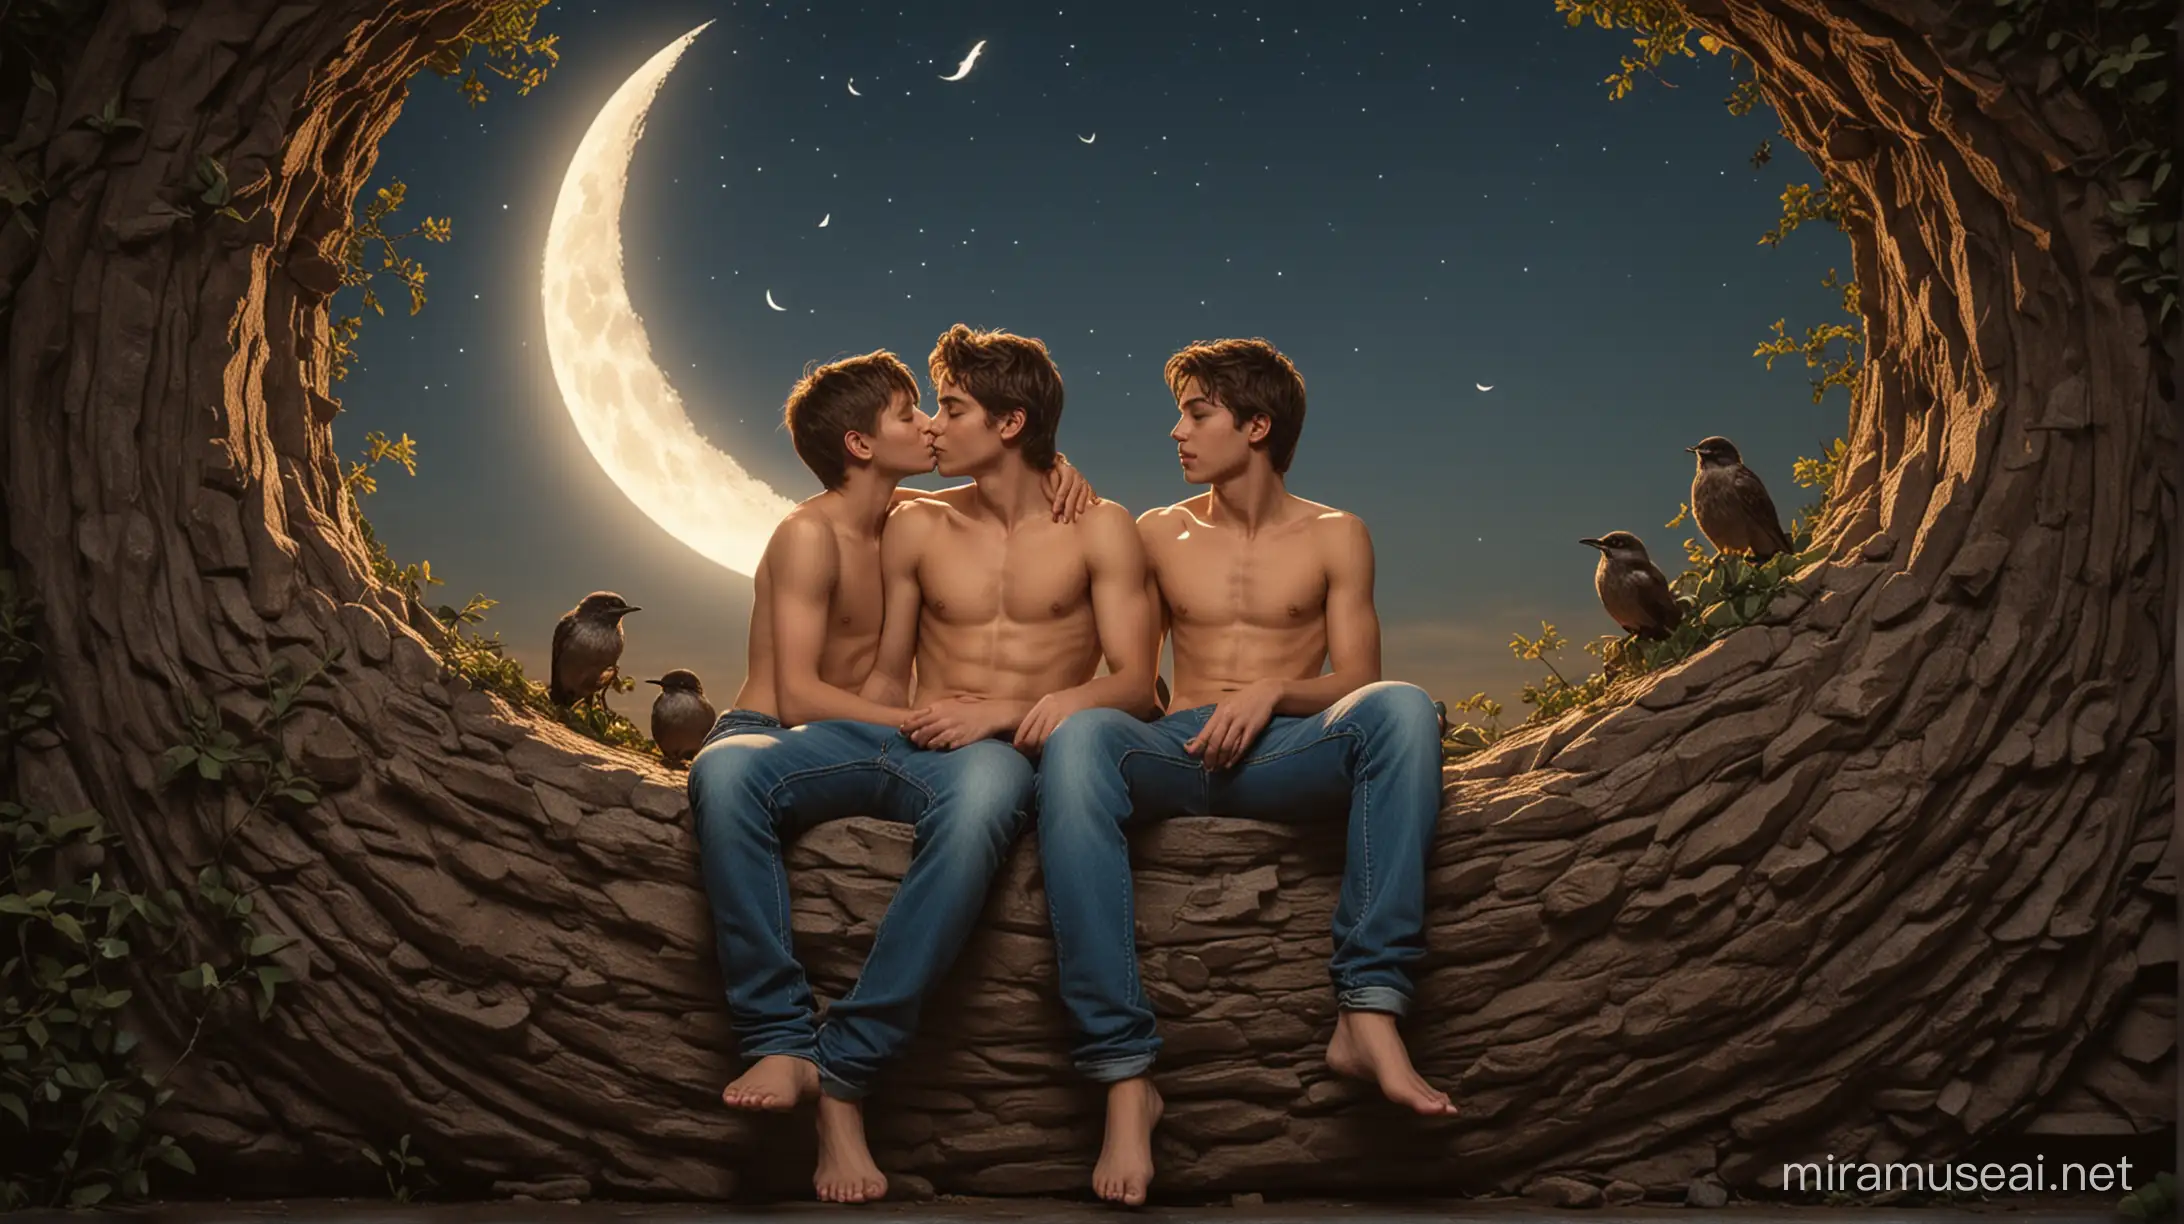 Affectionate Boys Embrace in Crescent Moon Surrounded by Birds